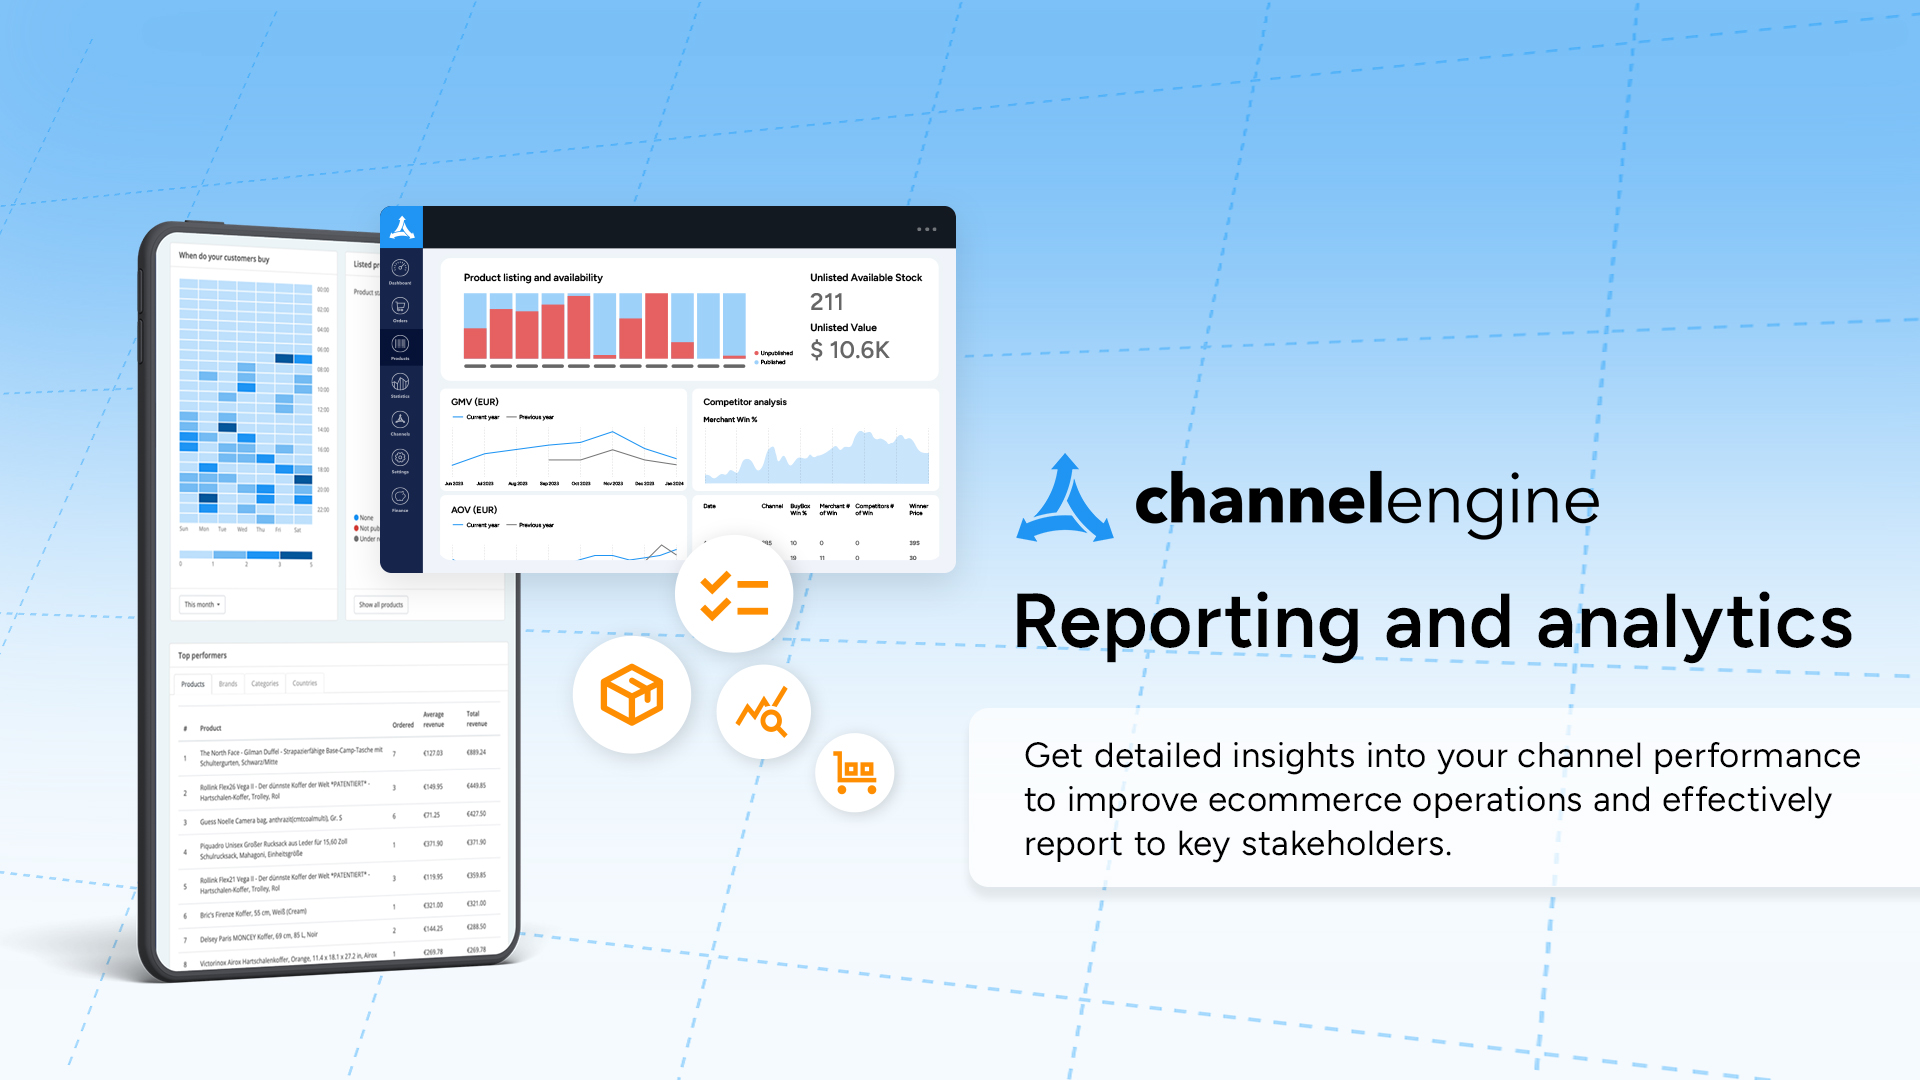 Get detailed insights into your channel performance to improve ecommerce operations and effectively report to key stakeholders.